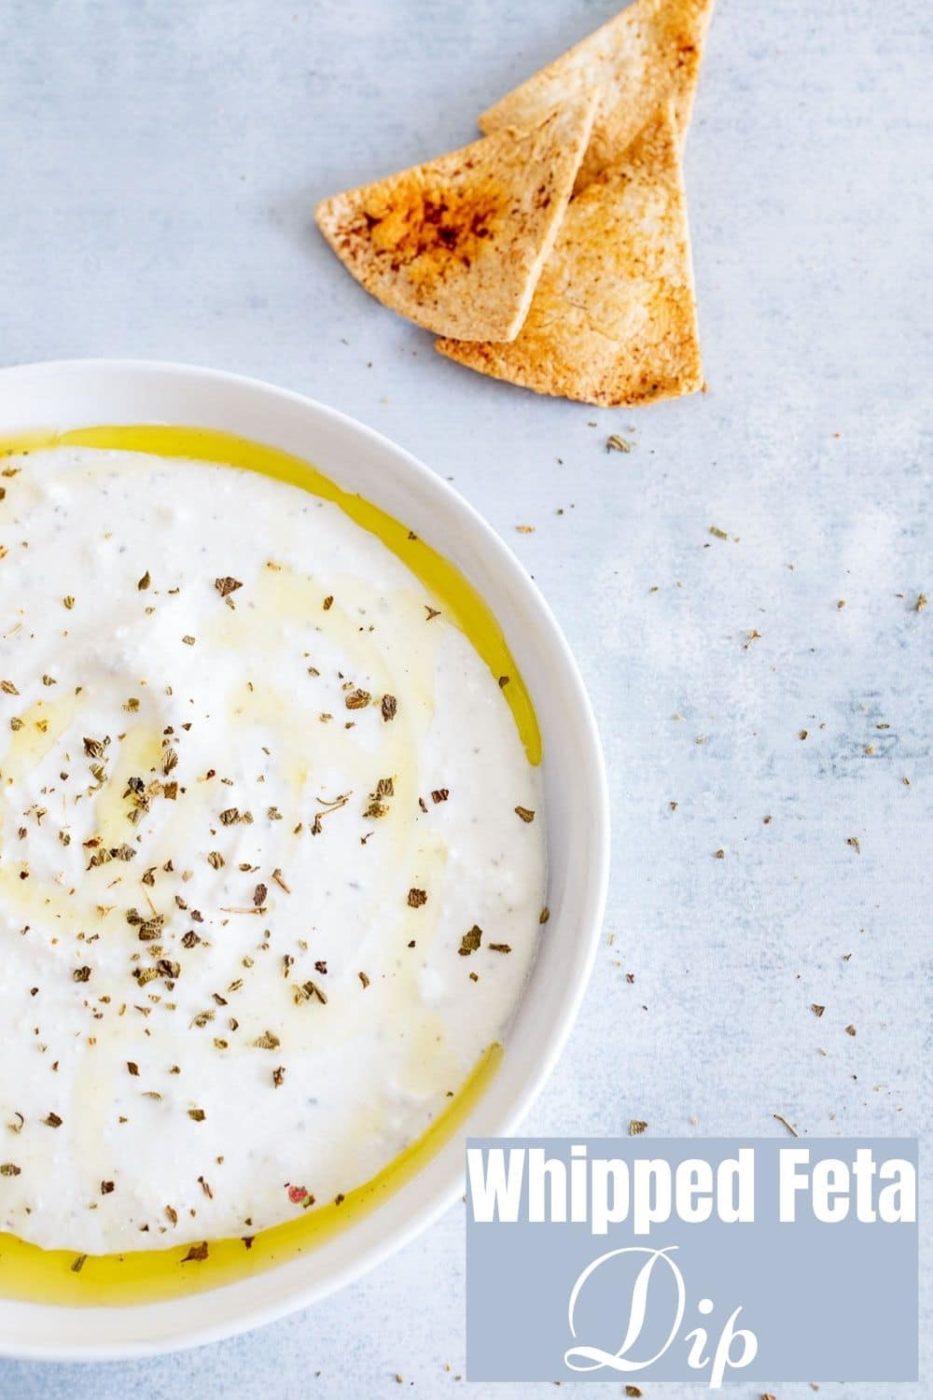 Closeup view of a white bowl filled with the whipped feta bowl with oil and seasoning as garnish.